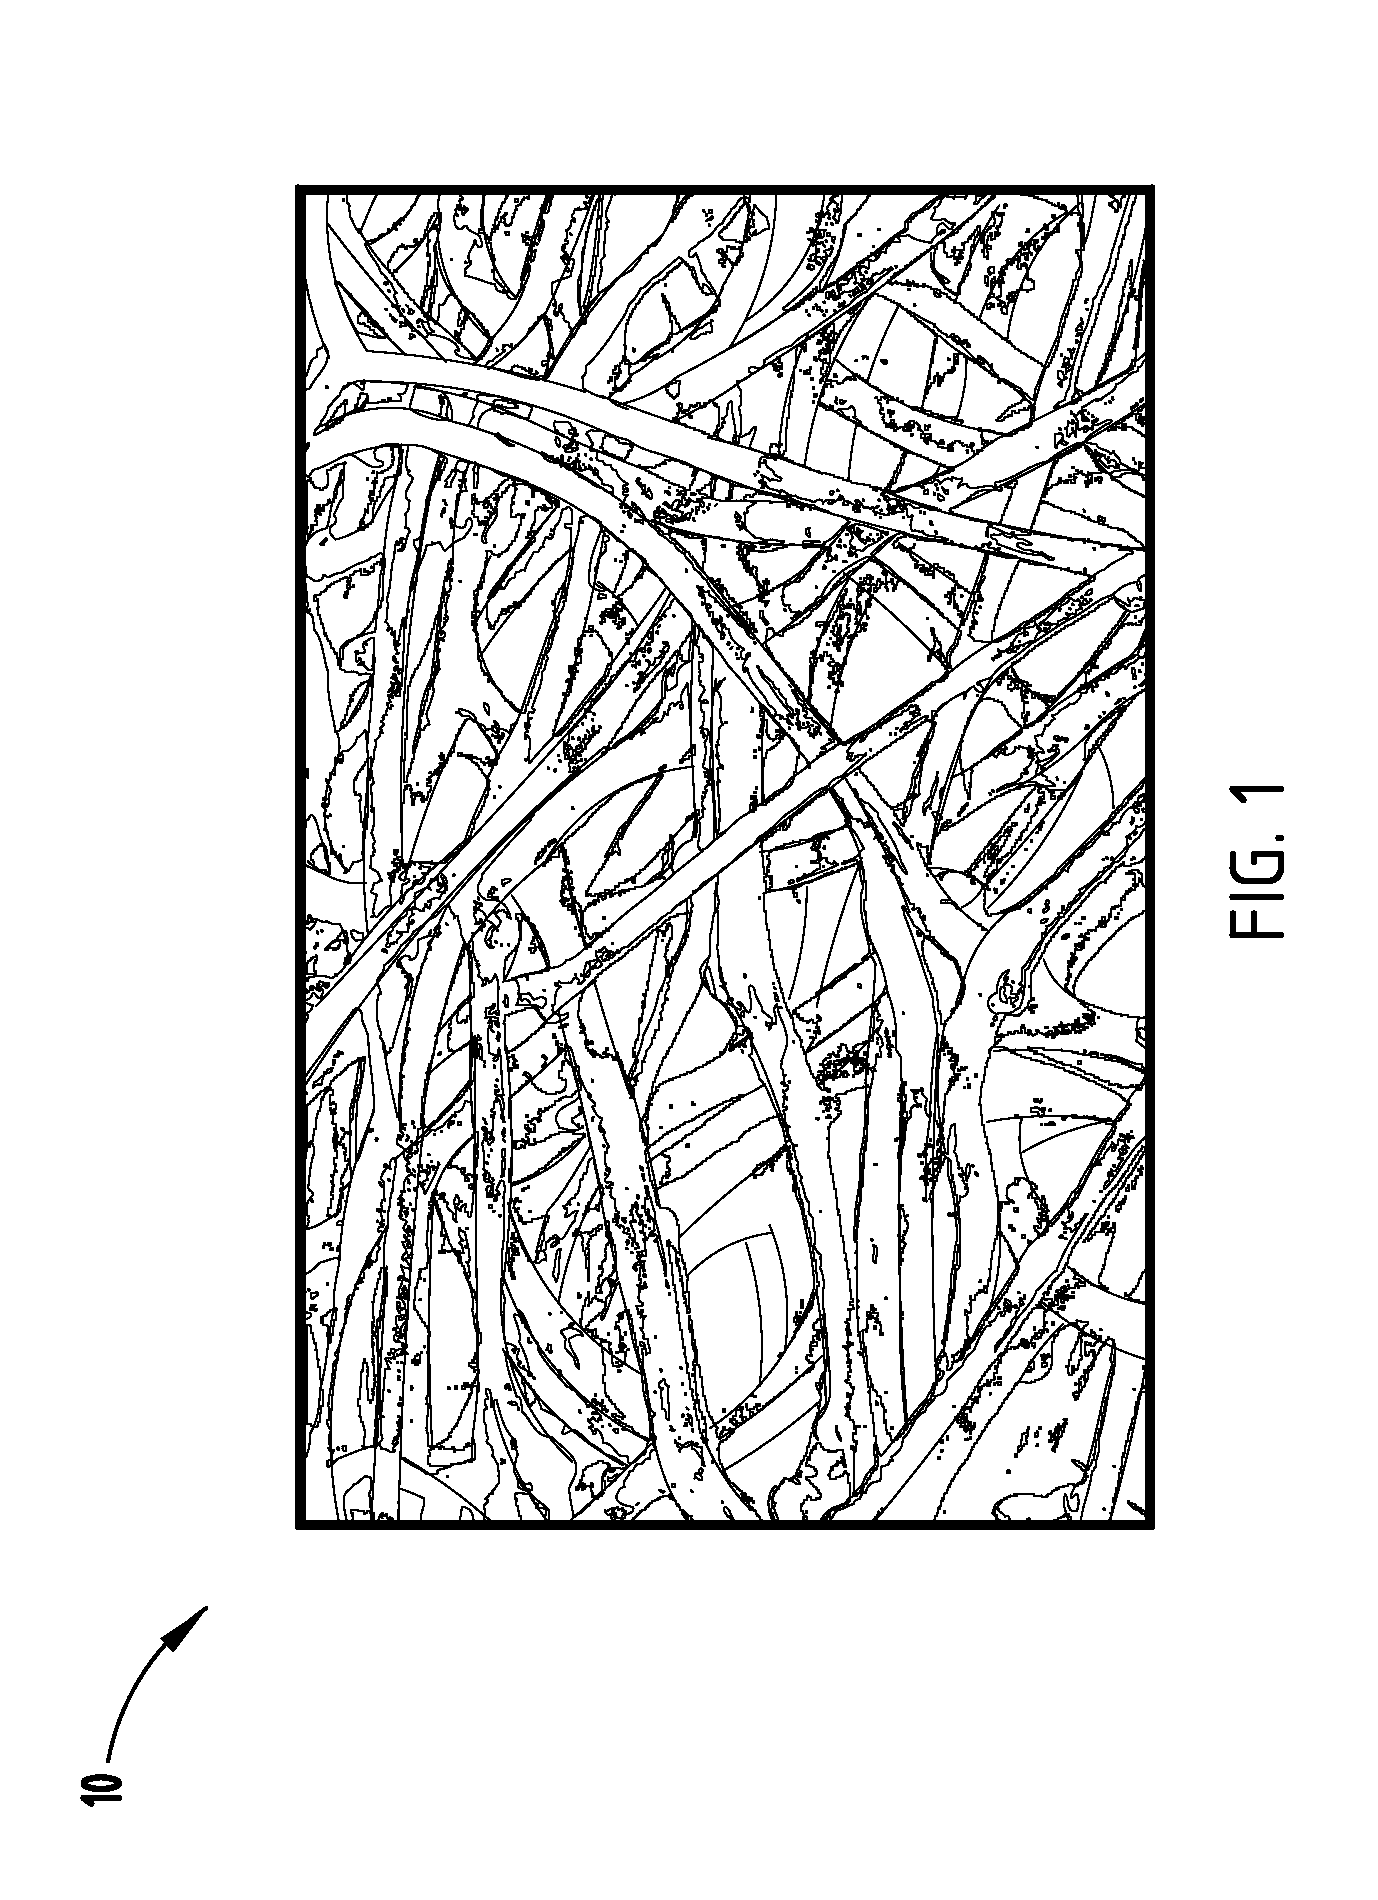 Mycelium structure with insert and method